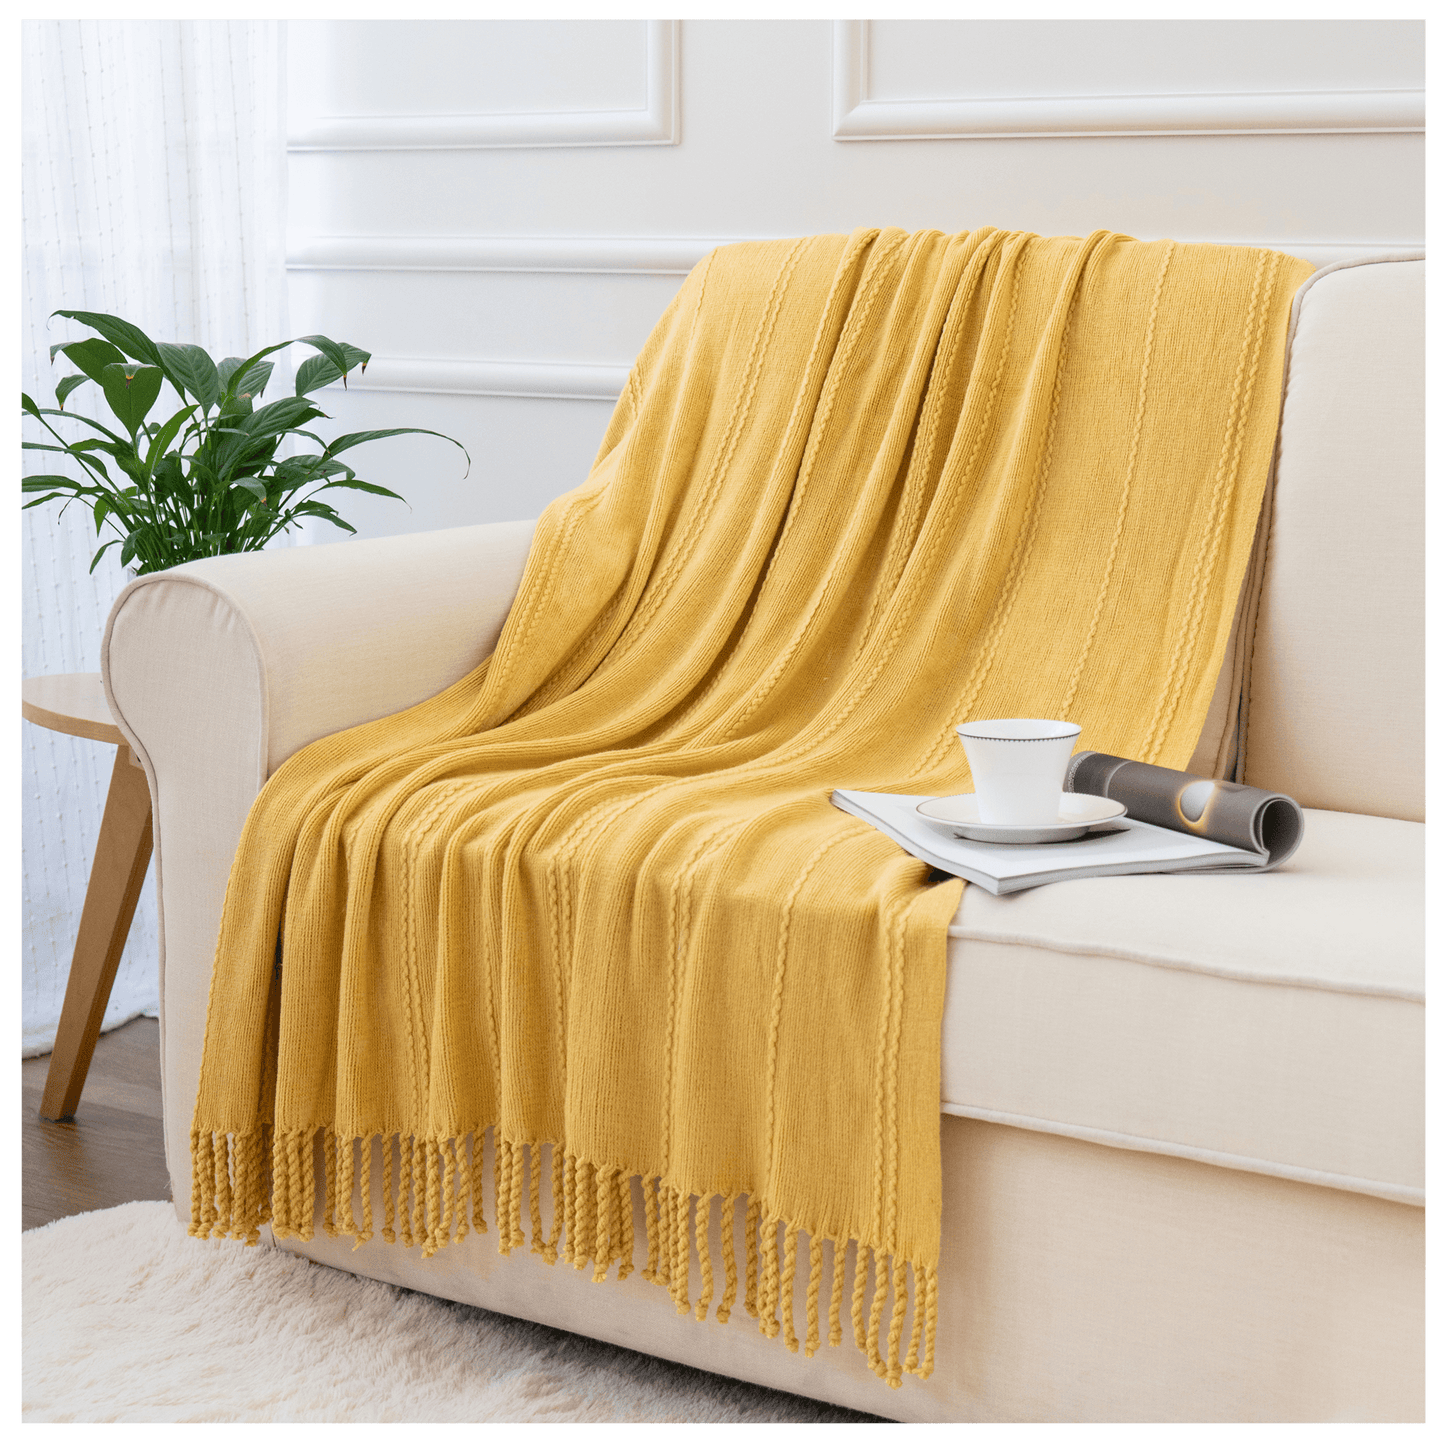 Cable Knit Woven Luxury Throw Blanket with Tassel Ends 50"x 60" (Green) BTL15019 green/blue